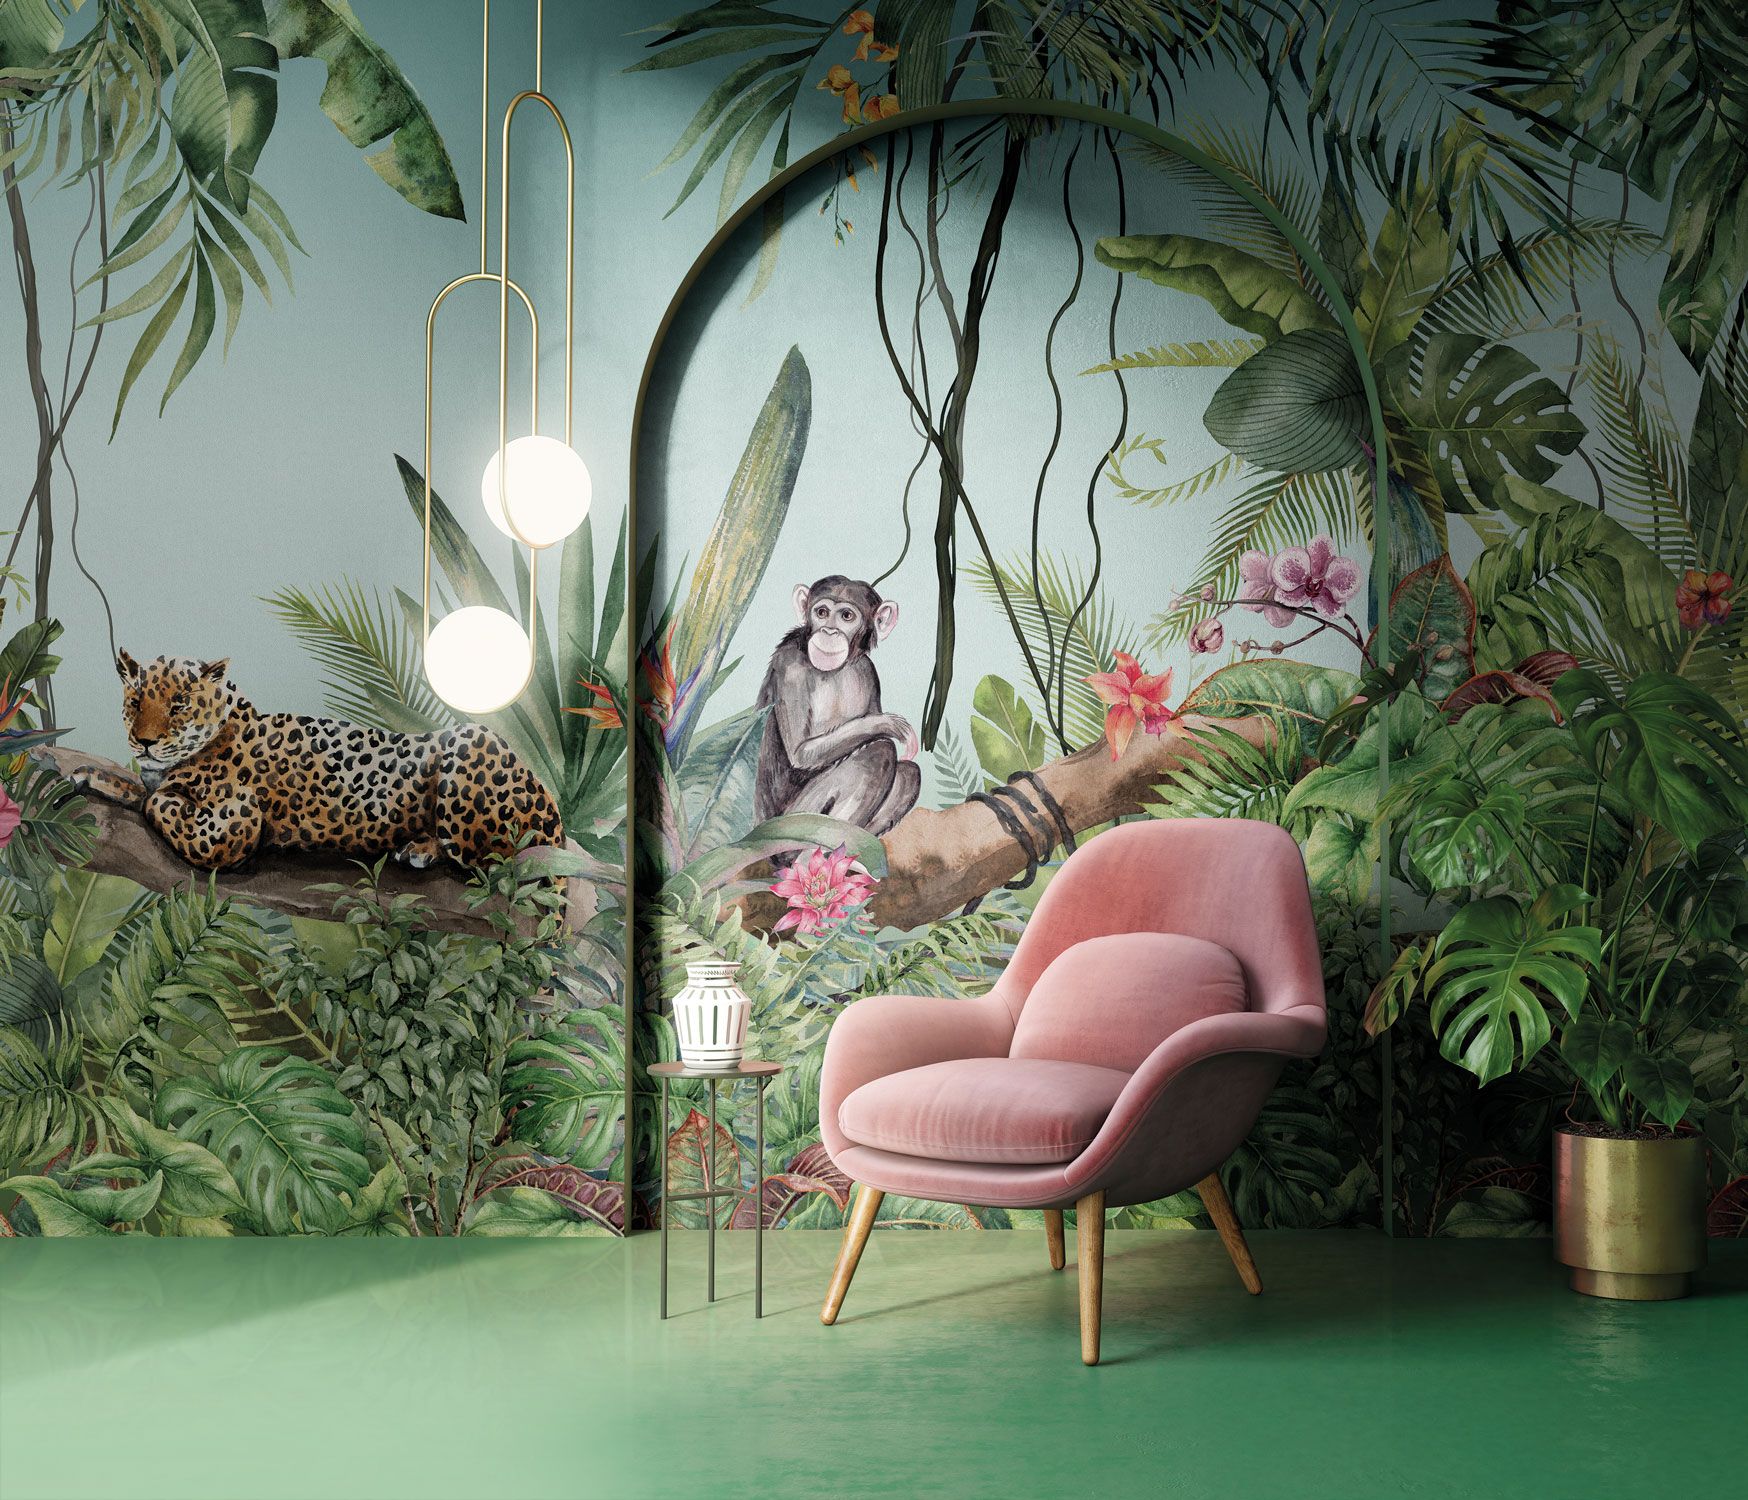 Jungle Style wallpaper by Inkiostro Bianco